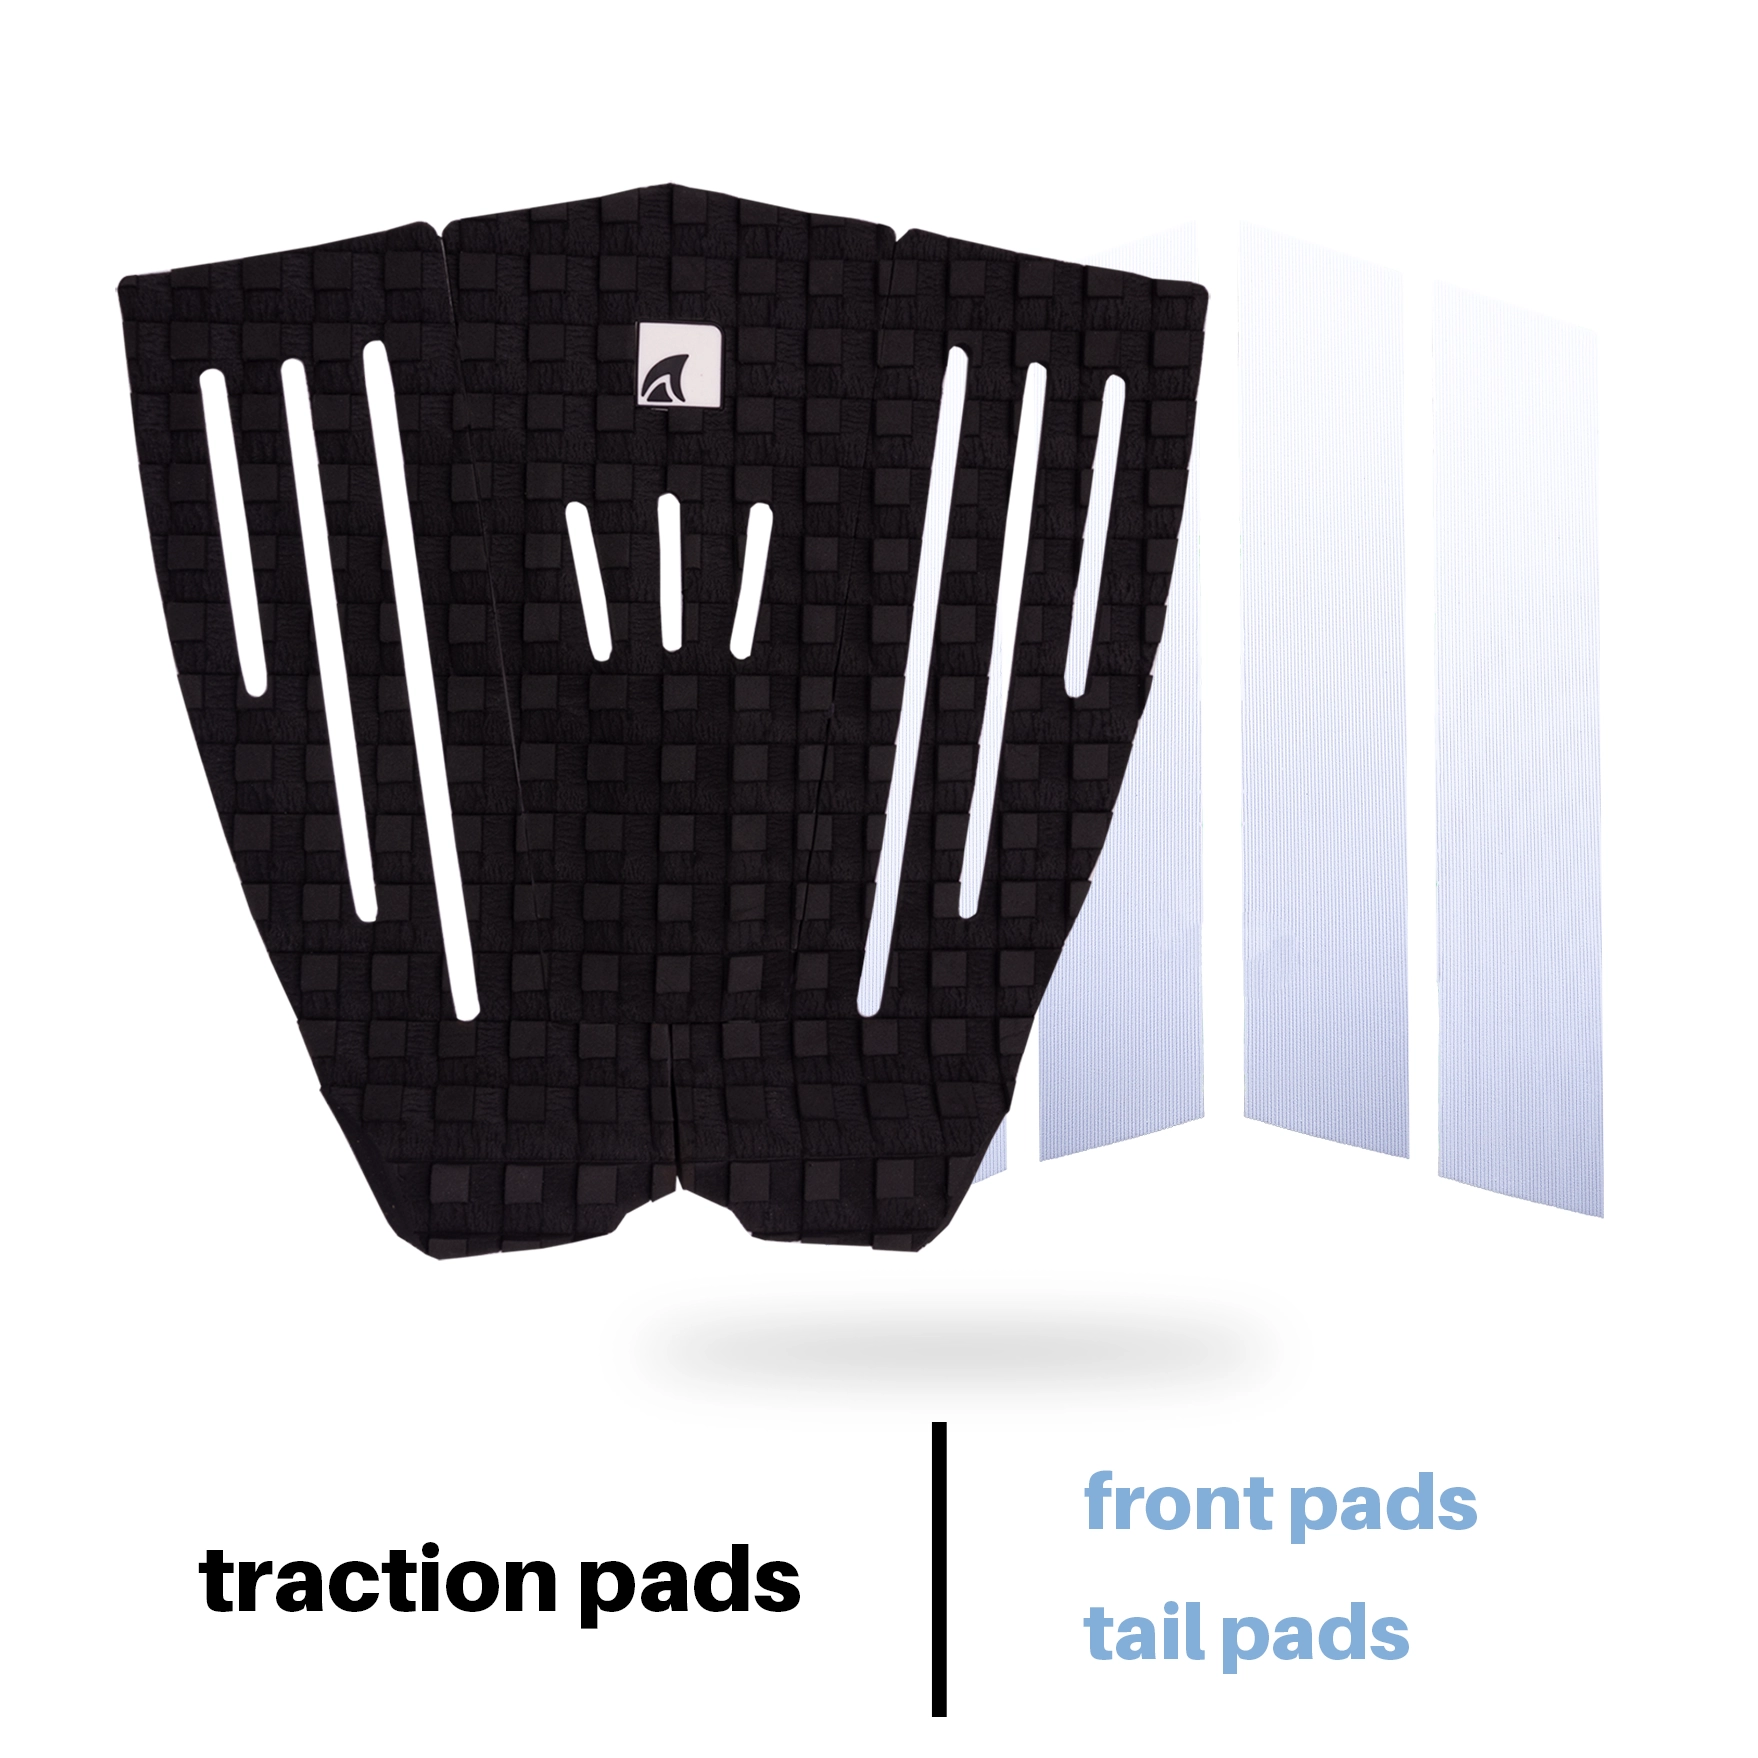 Traction pads at 28,5 €